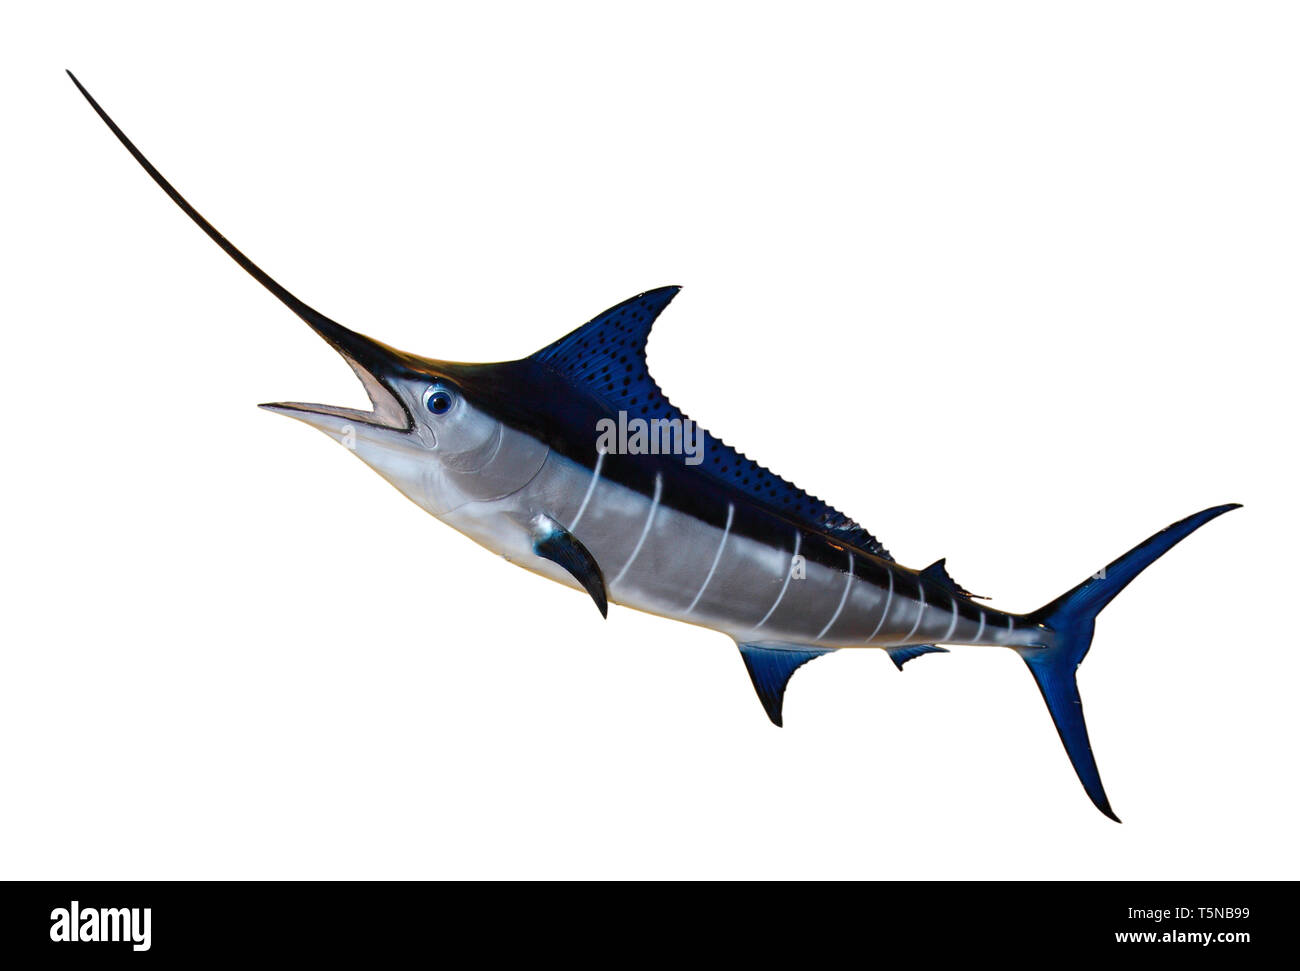 Fishing swordfish Cut Out Stock Images & Pictures - Alamy